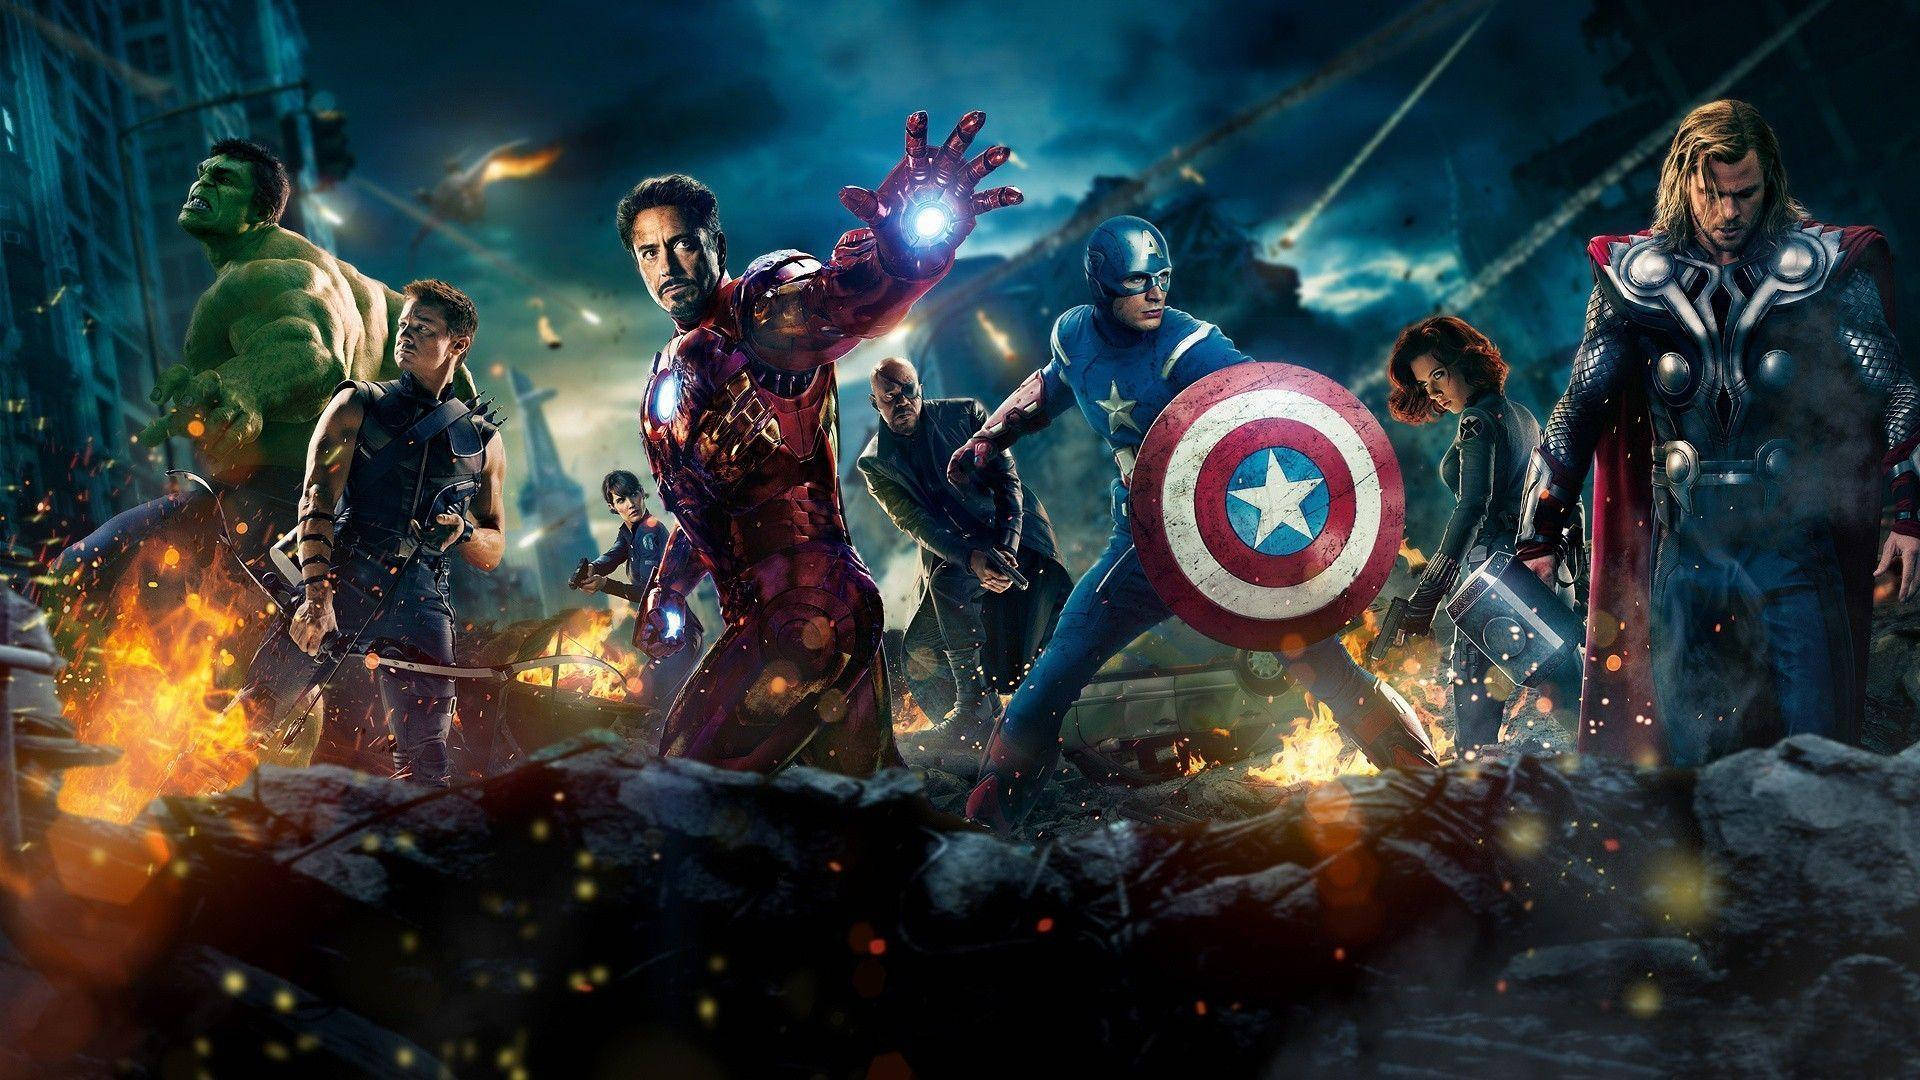 Join The Avengers as they unite to bring justice in the world. Wallpaper